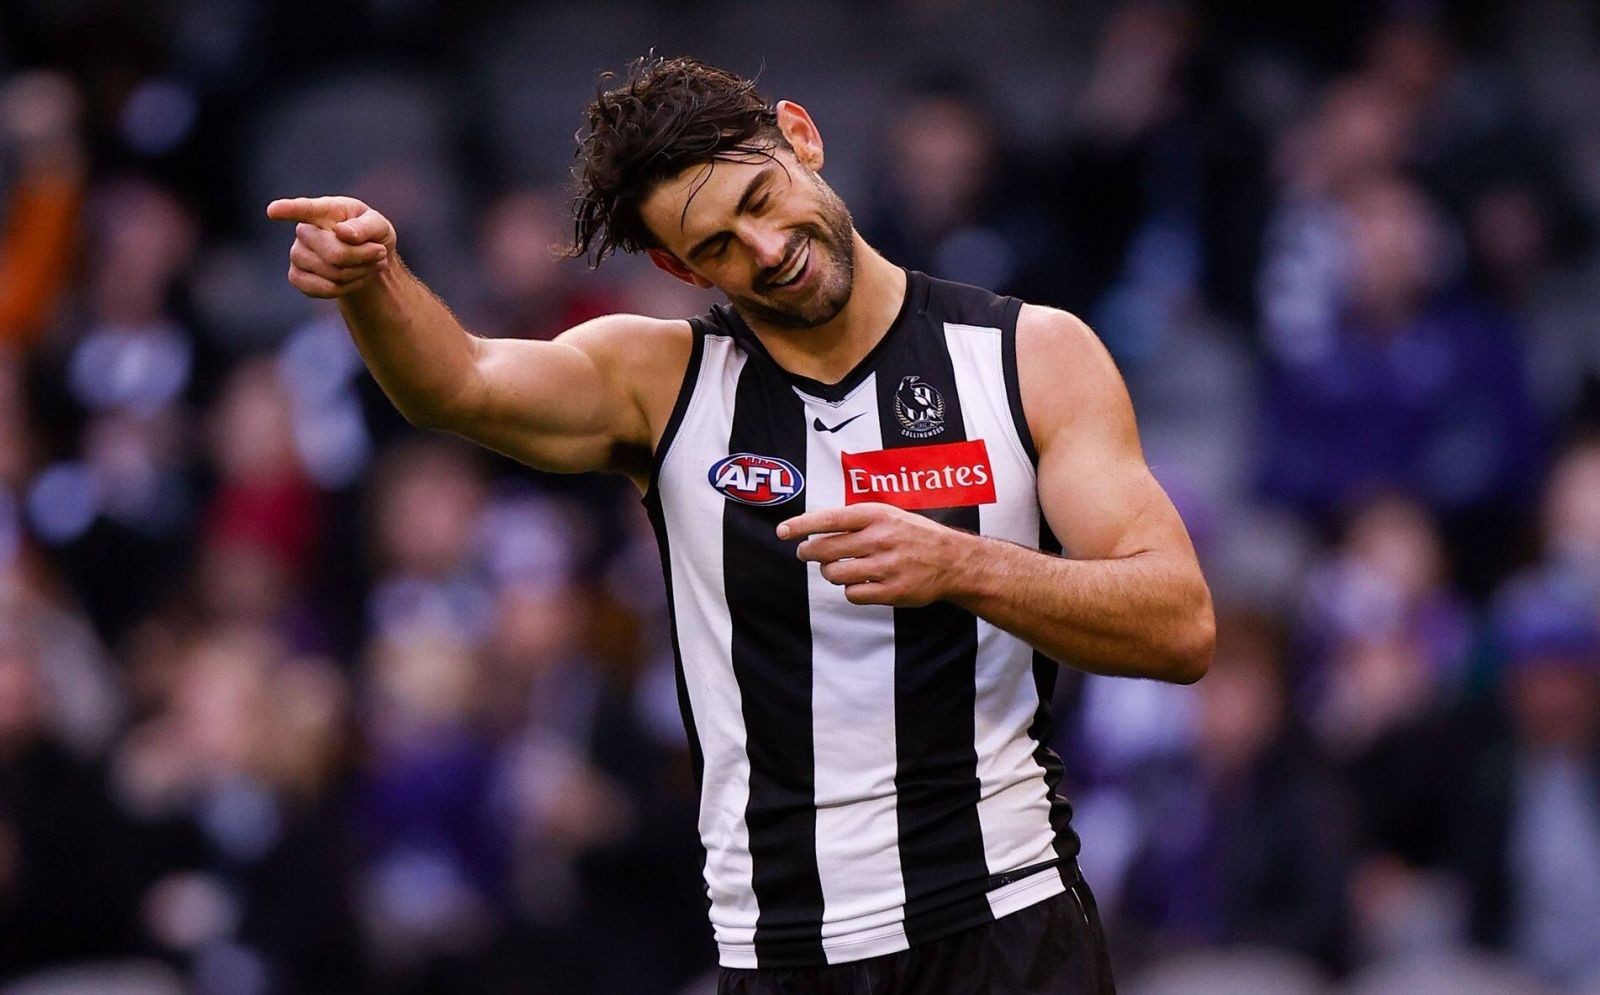 AFL 2022 Daily Fantasy Tips: Round 6 Monday